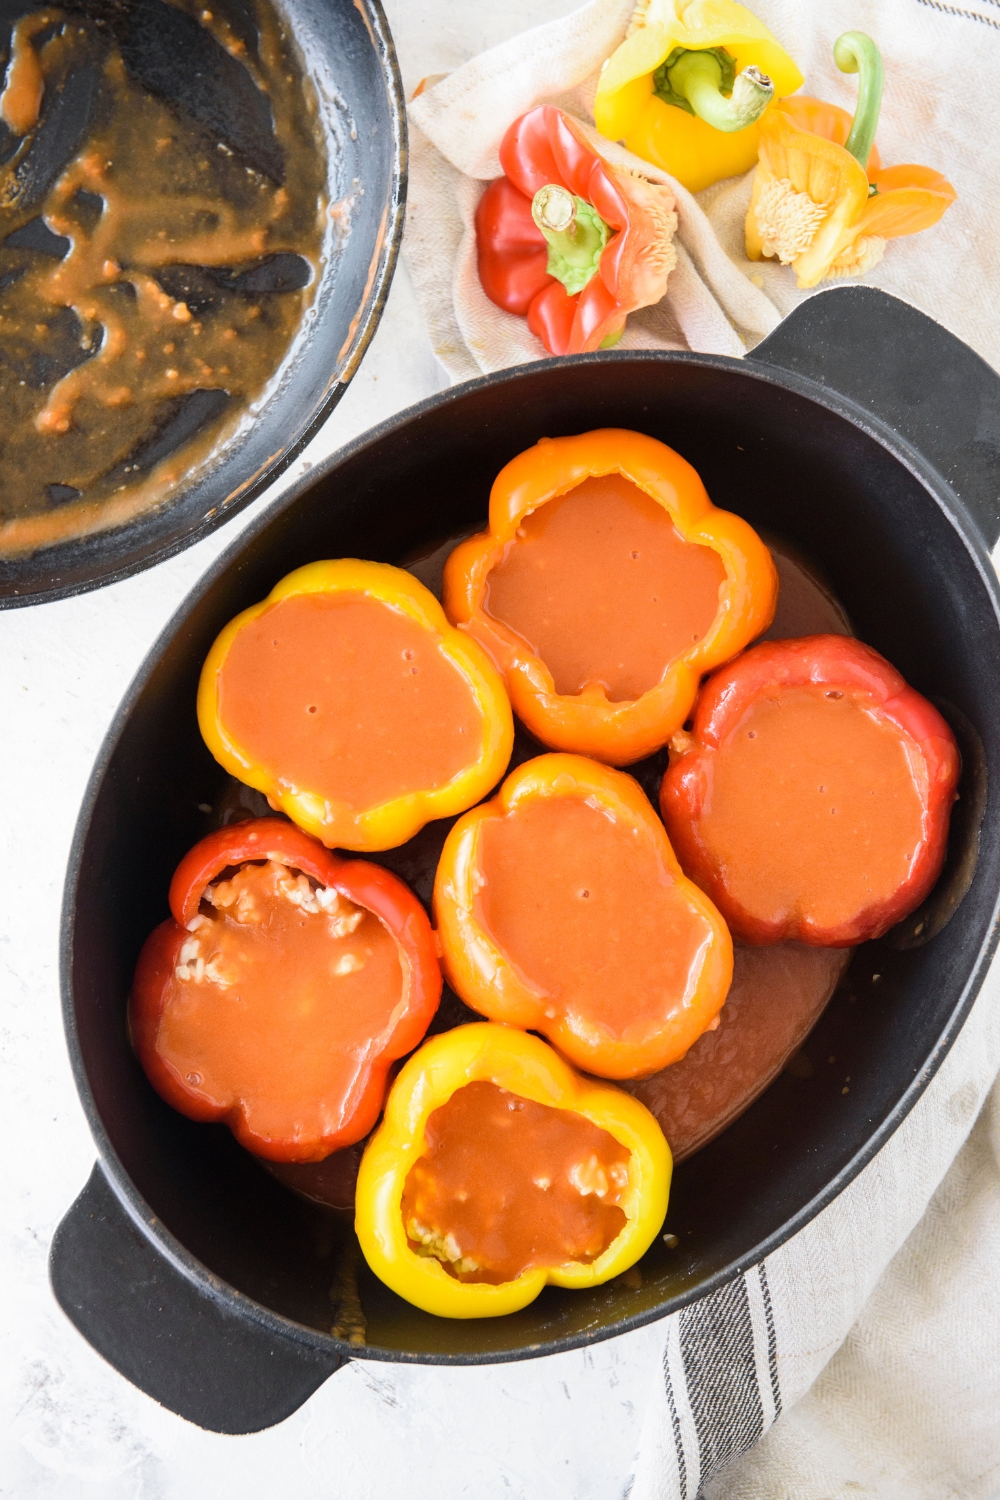 A baking dish filled with bell peppers that have been stuffed with ground meat and rice and each pepper has been topped with tomato sauce.